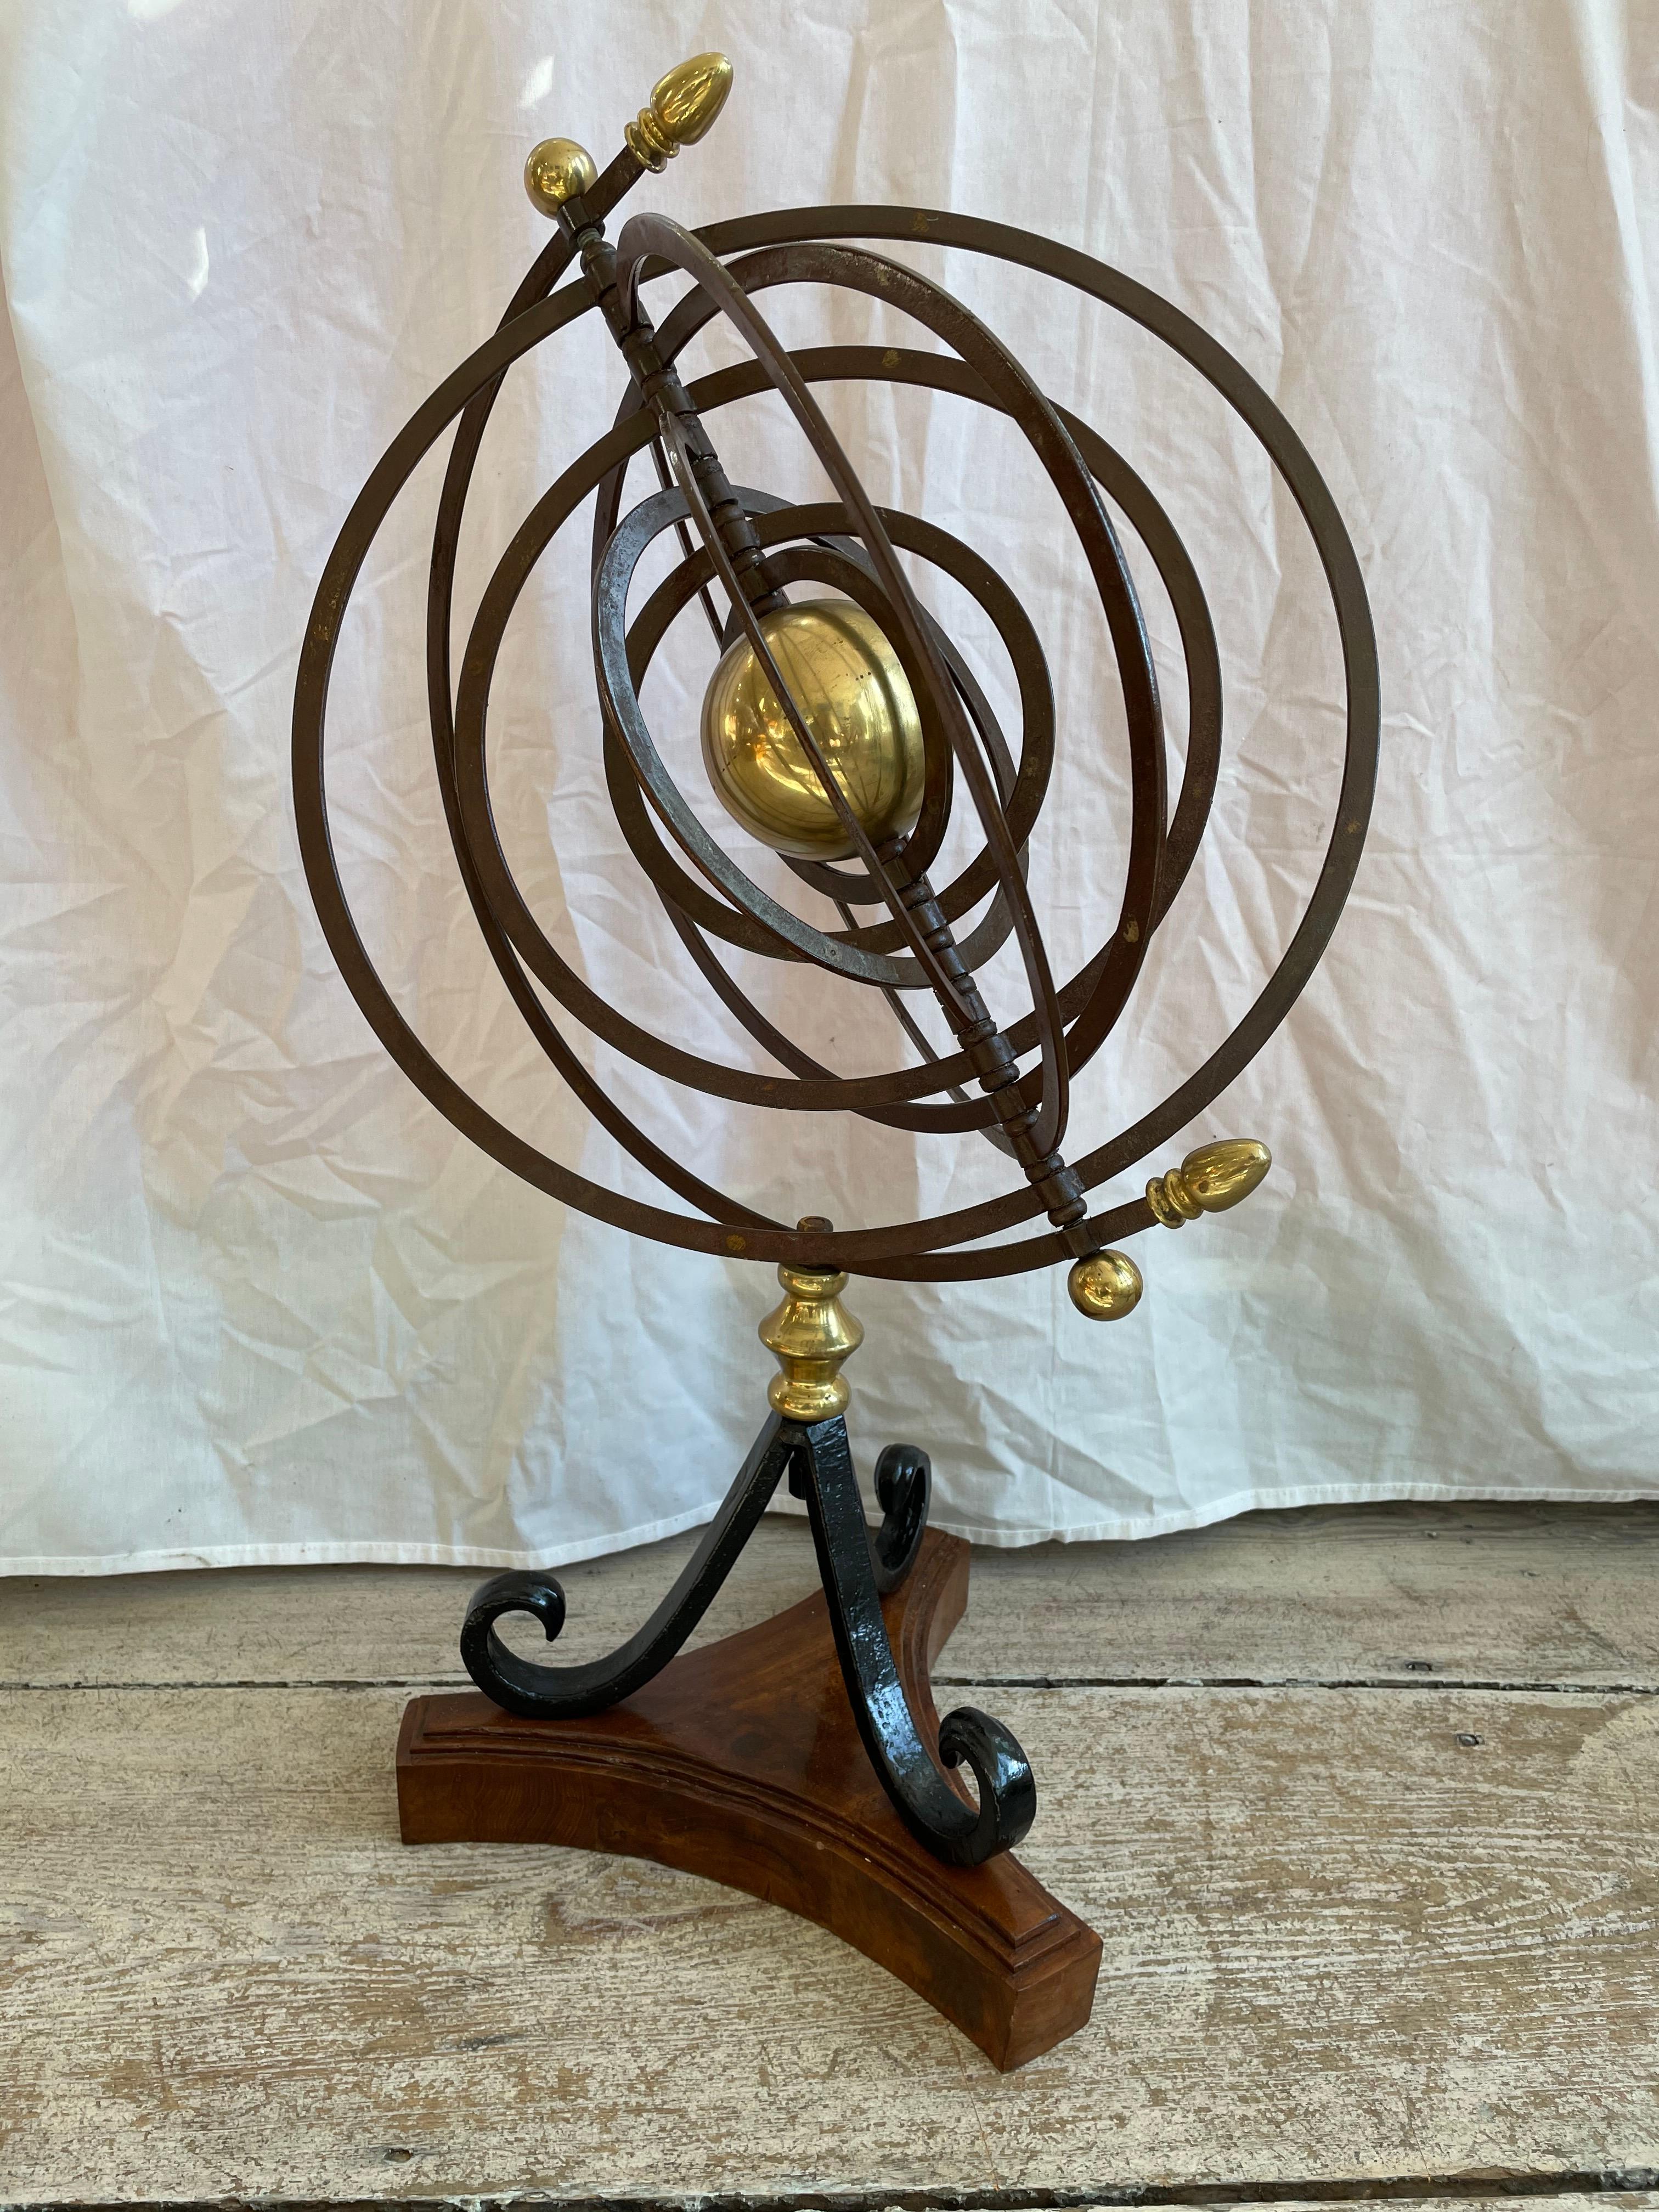 An iron and brass celestial sphere Armillary on a teak base. Kinetic and dimensional with movable rings depicting the orbits of the 9 planets. The brass center represents the sun. The rings can also lay flat creating a totally different look. In two